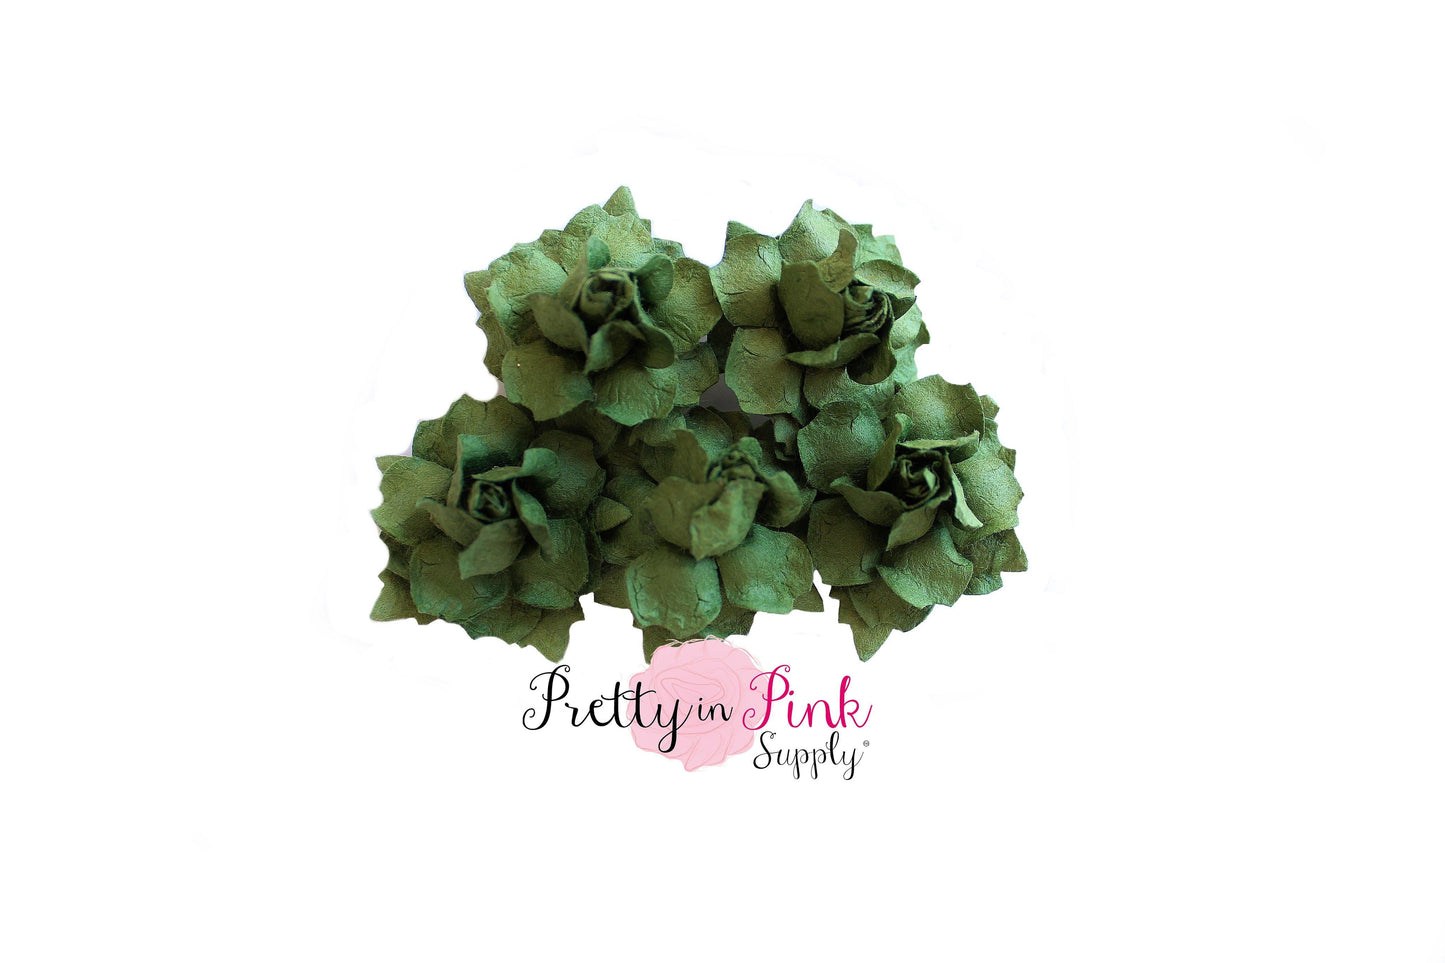 1" PREMIUM Forest Green Paper Flowers - Pretty in Pink Supply